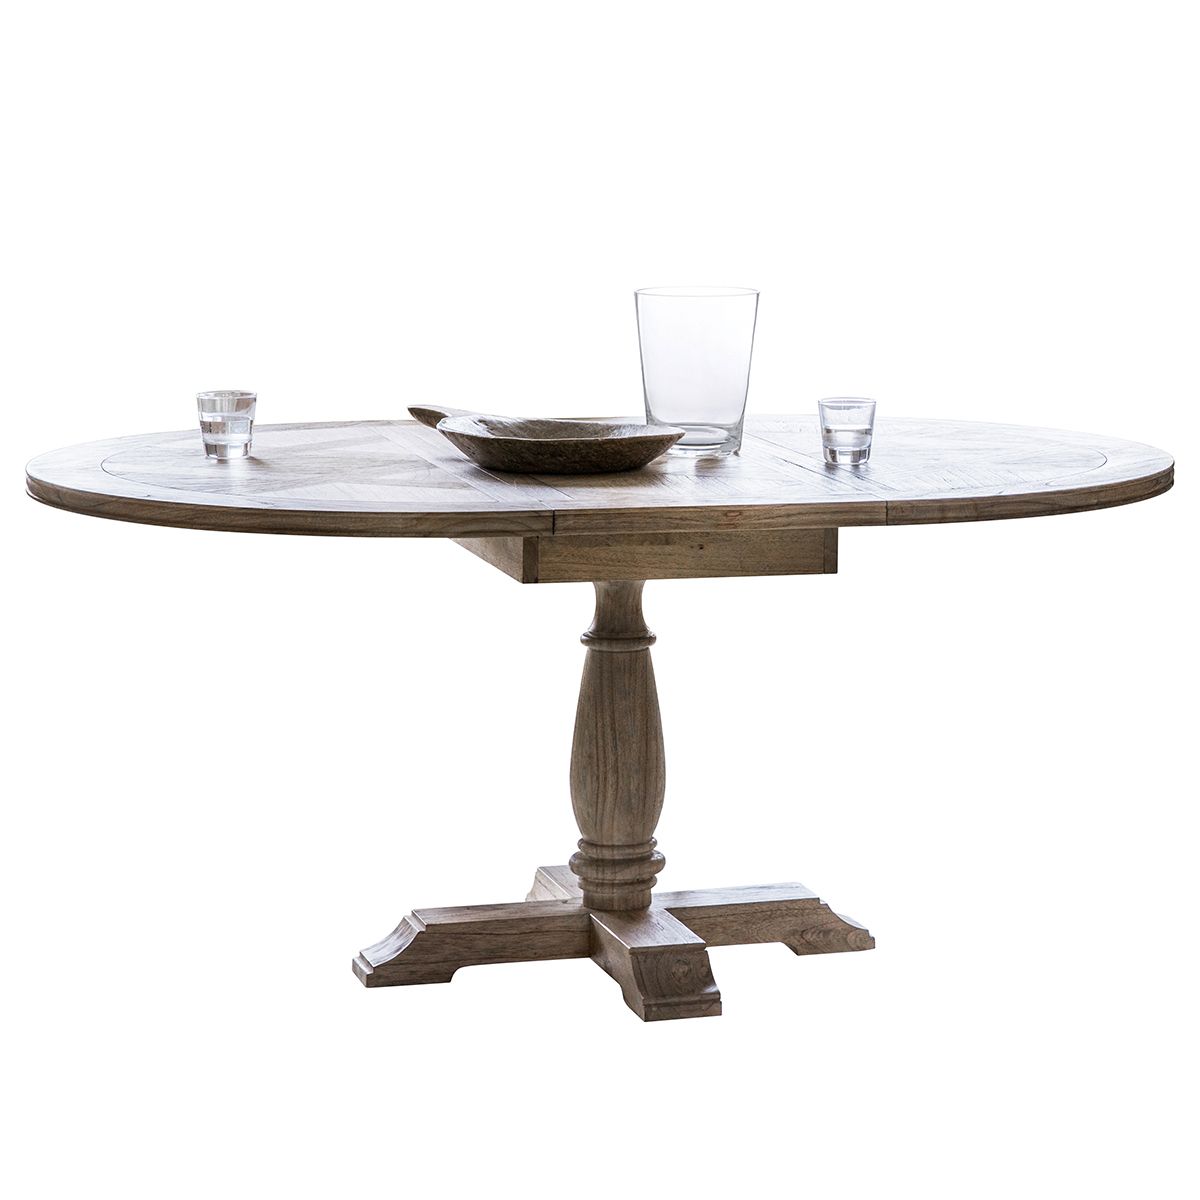 Gerald Round Extendable Dining Table - Vookoo Lifestyle